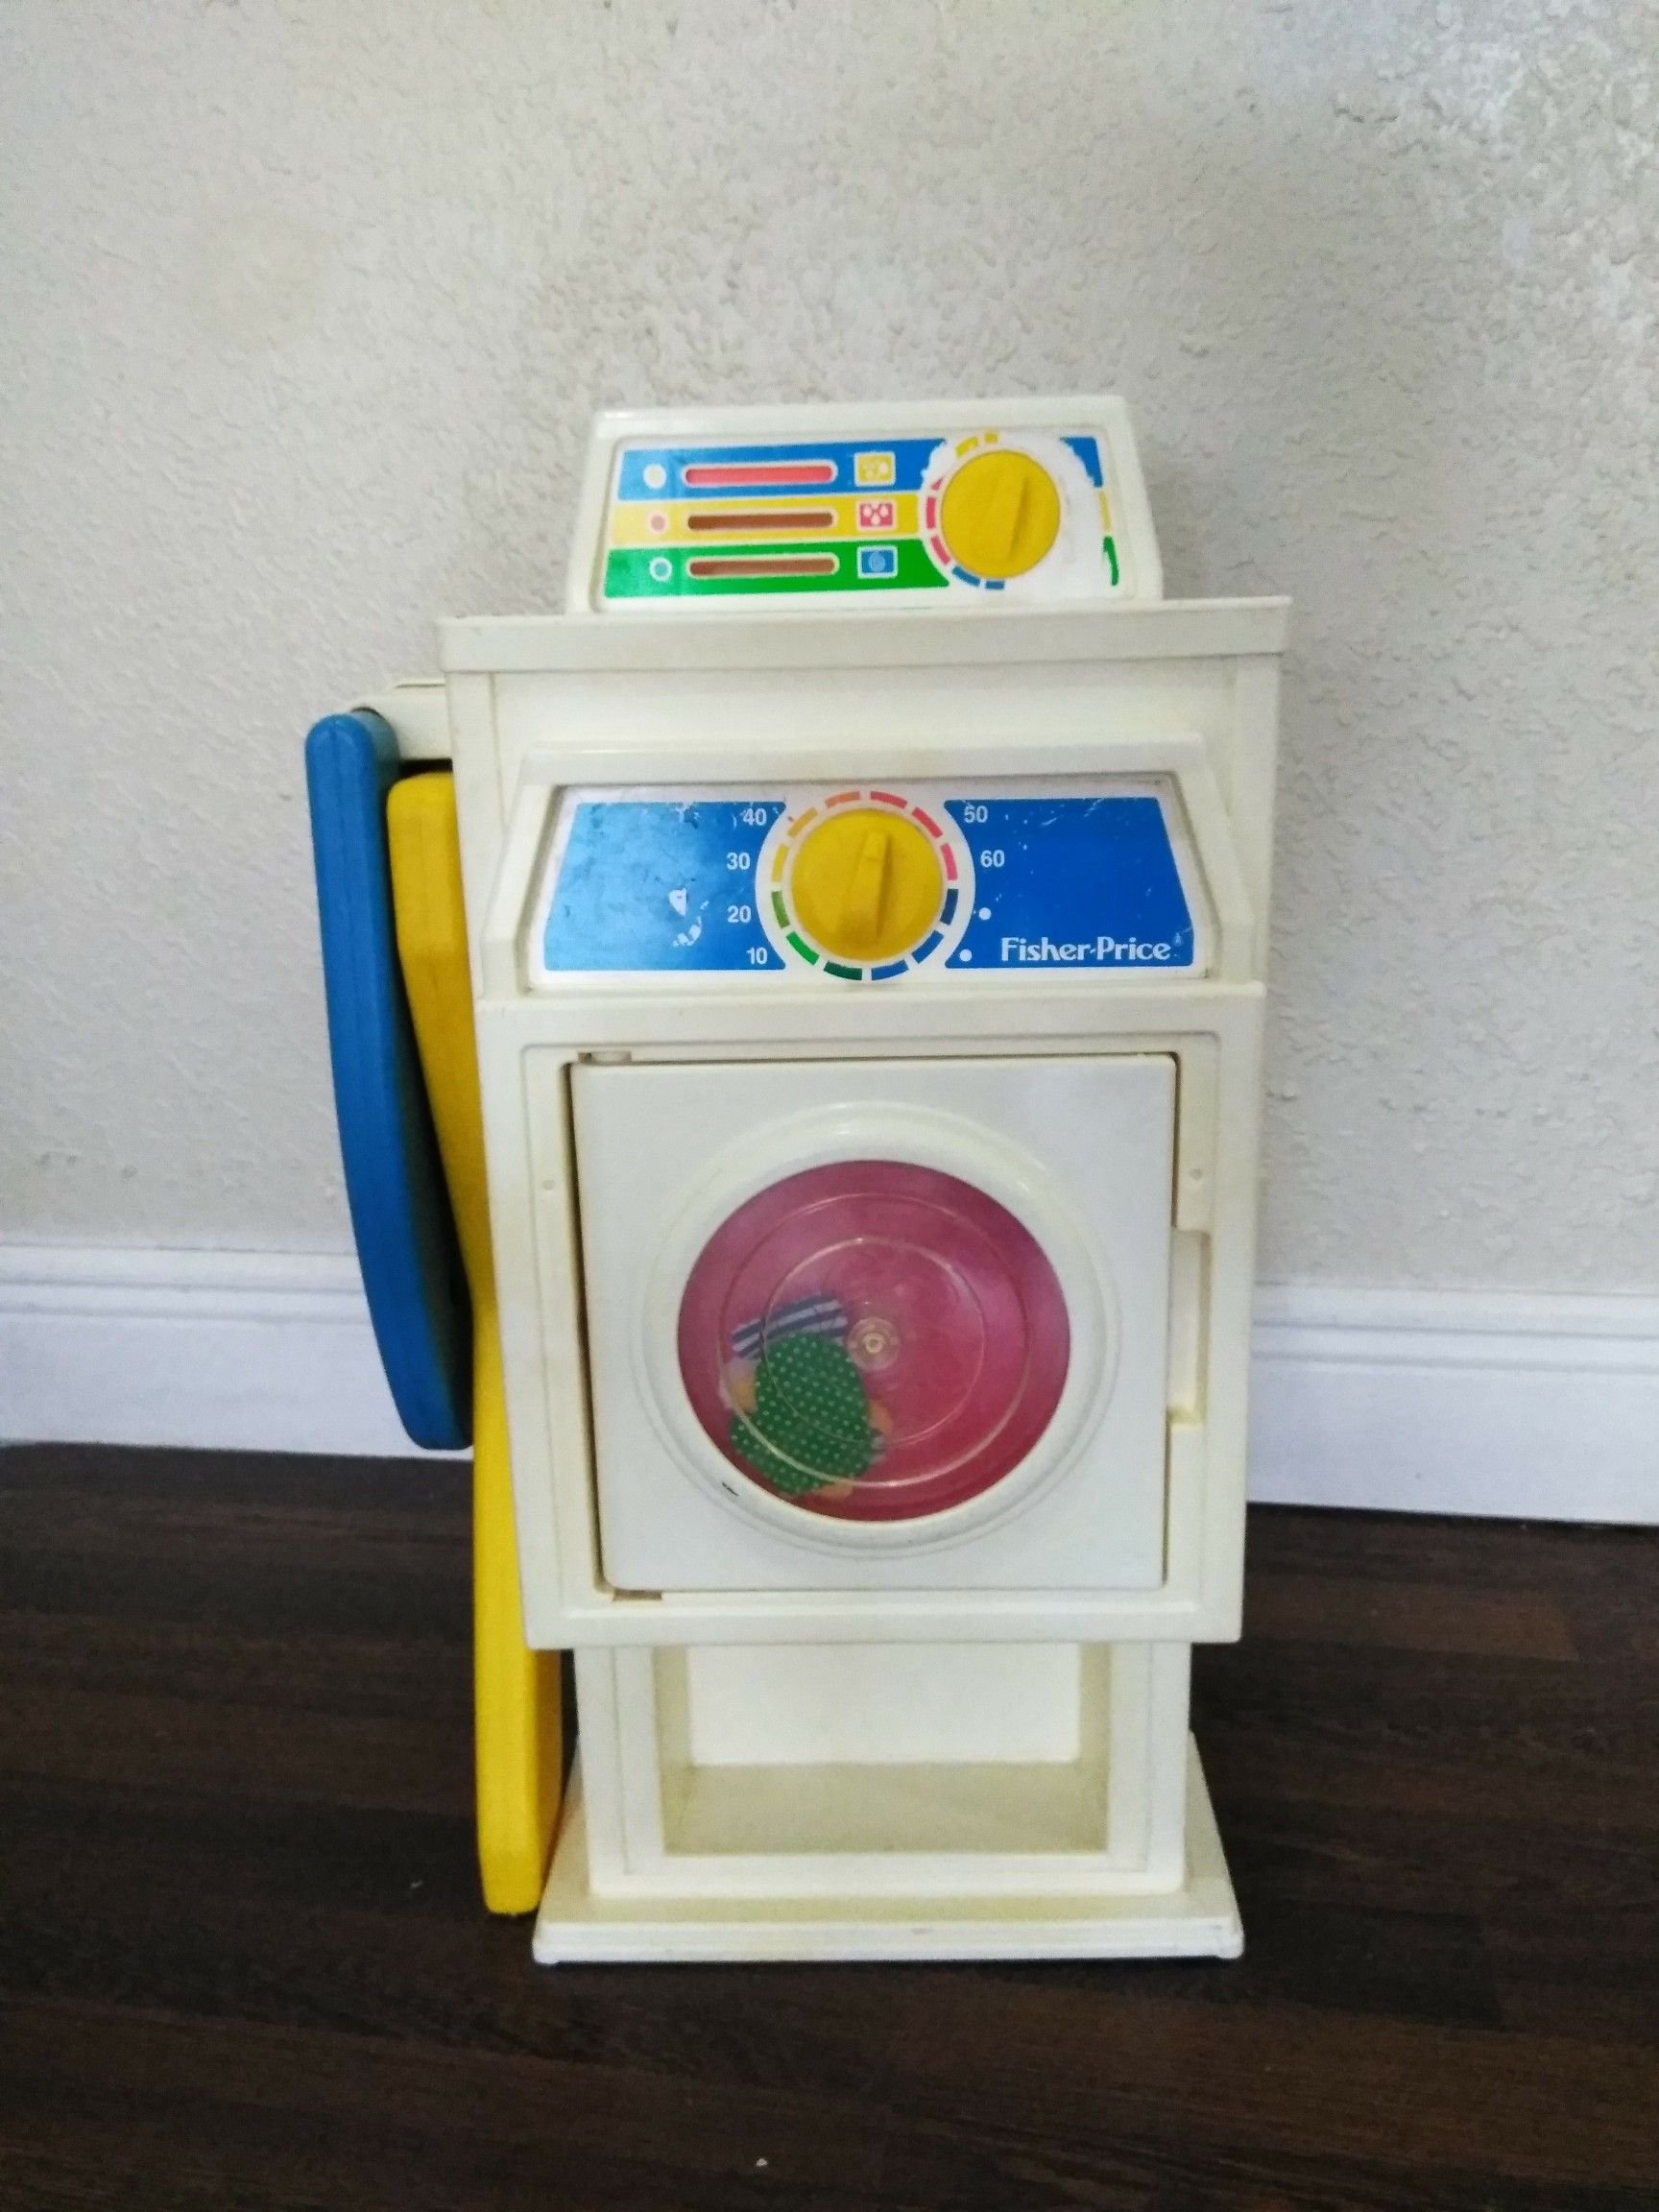 Washer dryer set with ironing board toys educational